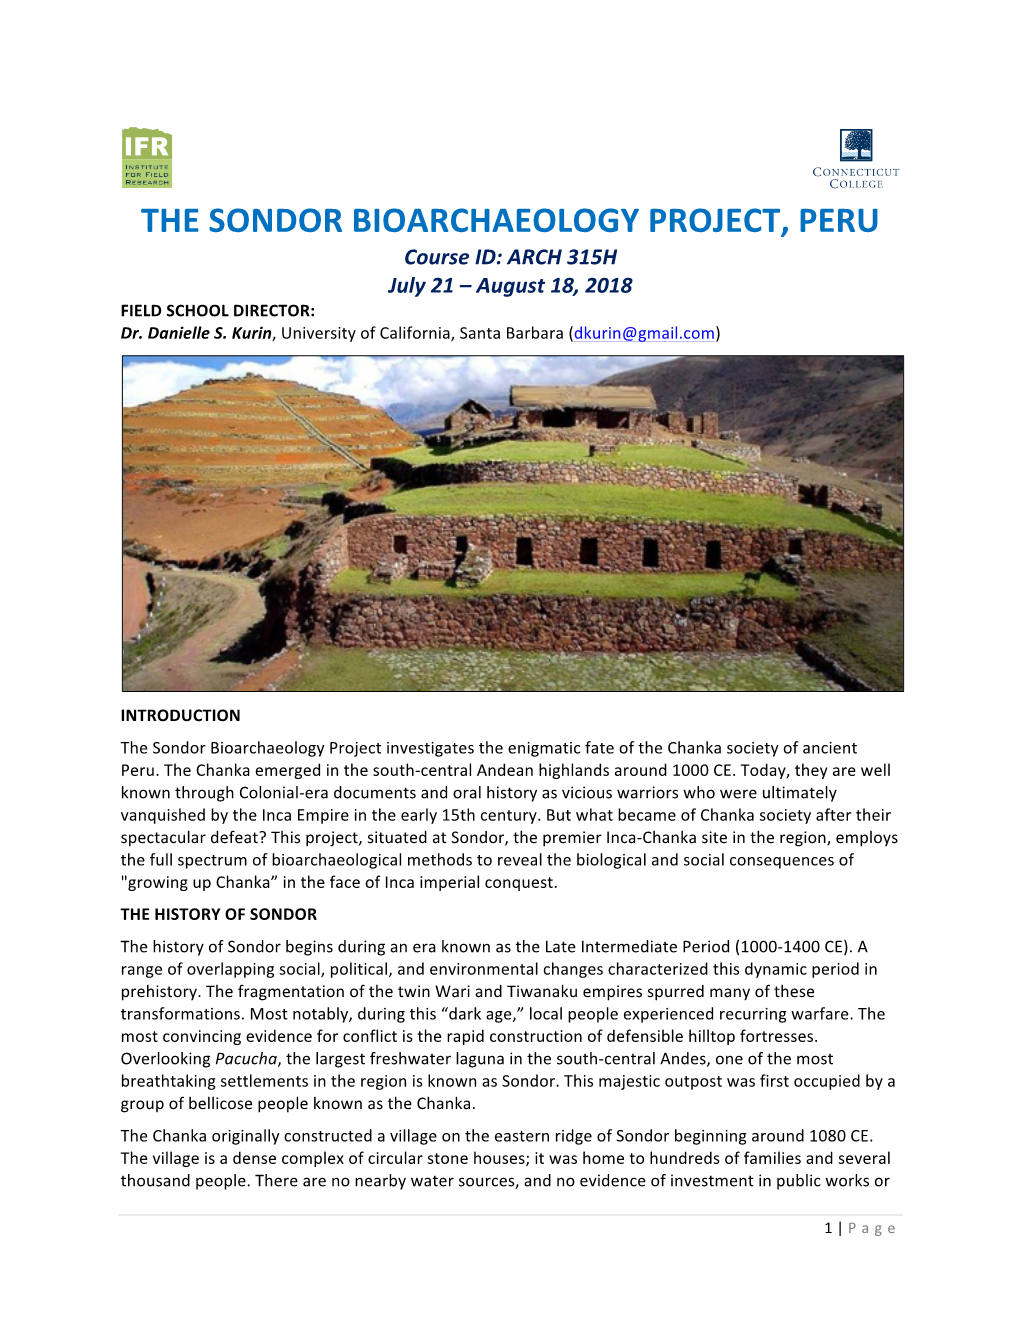 THE SONDOR BIOARCHAEOLOGY PROJECT, PERU Course ID: ARCH 315H July 21 – August 18, 2018 FIELD SCHOOL DIRECTOR: Dr